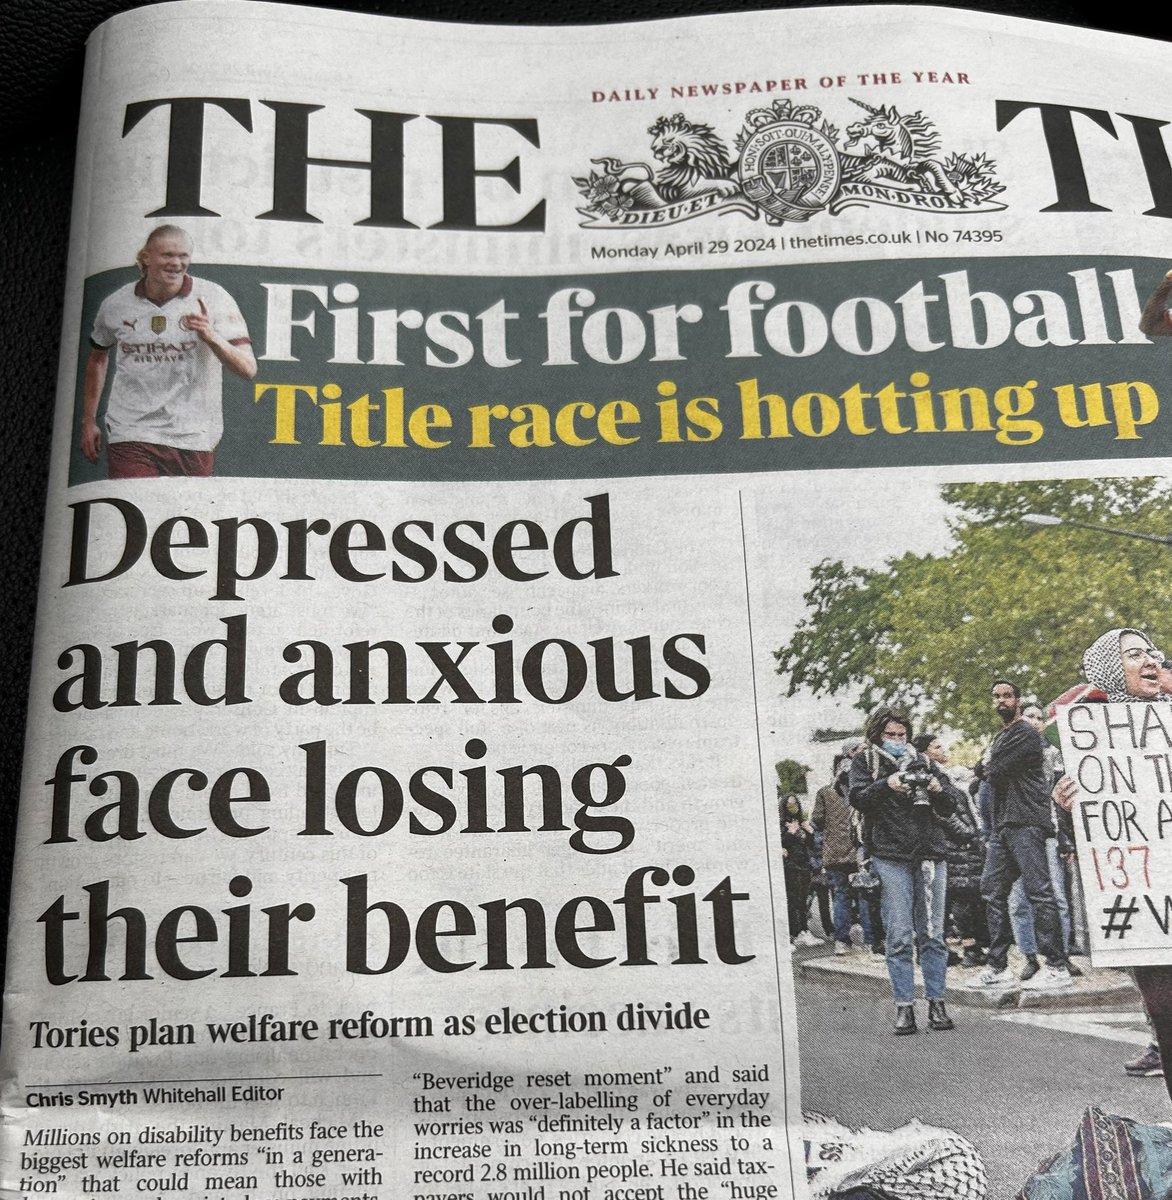 Maybe we can put this down to the heat being generated by a forthcoming General Election or is there really an appetite to blame depression on the depressed, anxiety on the anxious and perhaps even suicide on the suicidal. @BatonOfHopeUK